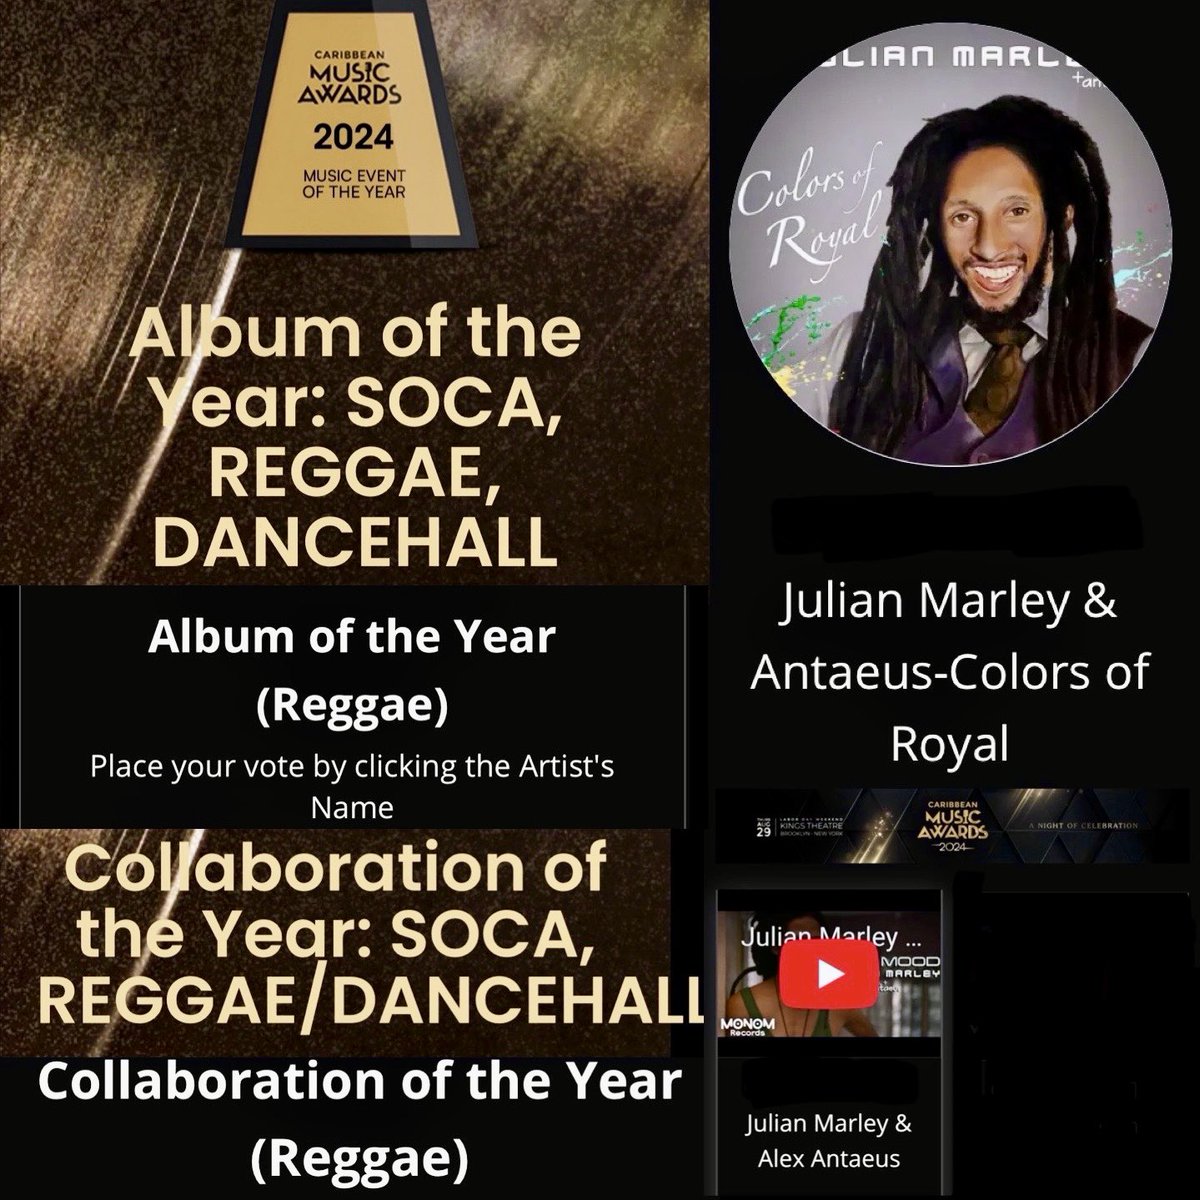 The Caribbean Music Awards are coming up in NYC this August & we have been nominated in two categories. Please use the links below to vote for @JulianMarley & Antaeus for Album of the Year caribmusicawards.com/album-of-the-y… & Collaboration of the Year caribmusicawards.com/collaboration-… THANK YOU!